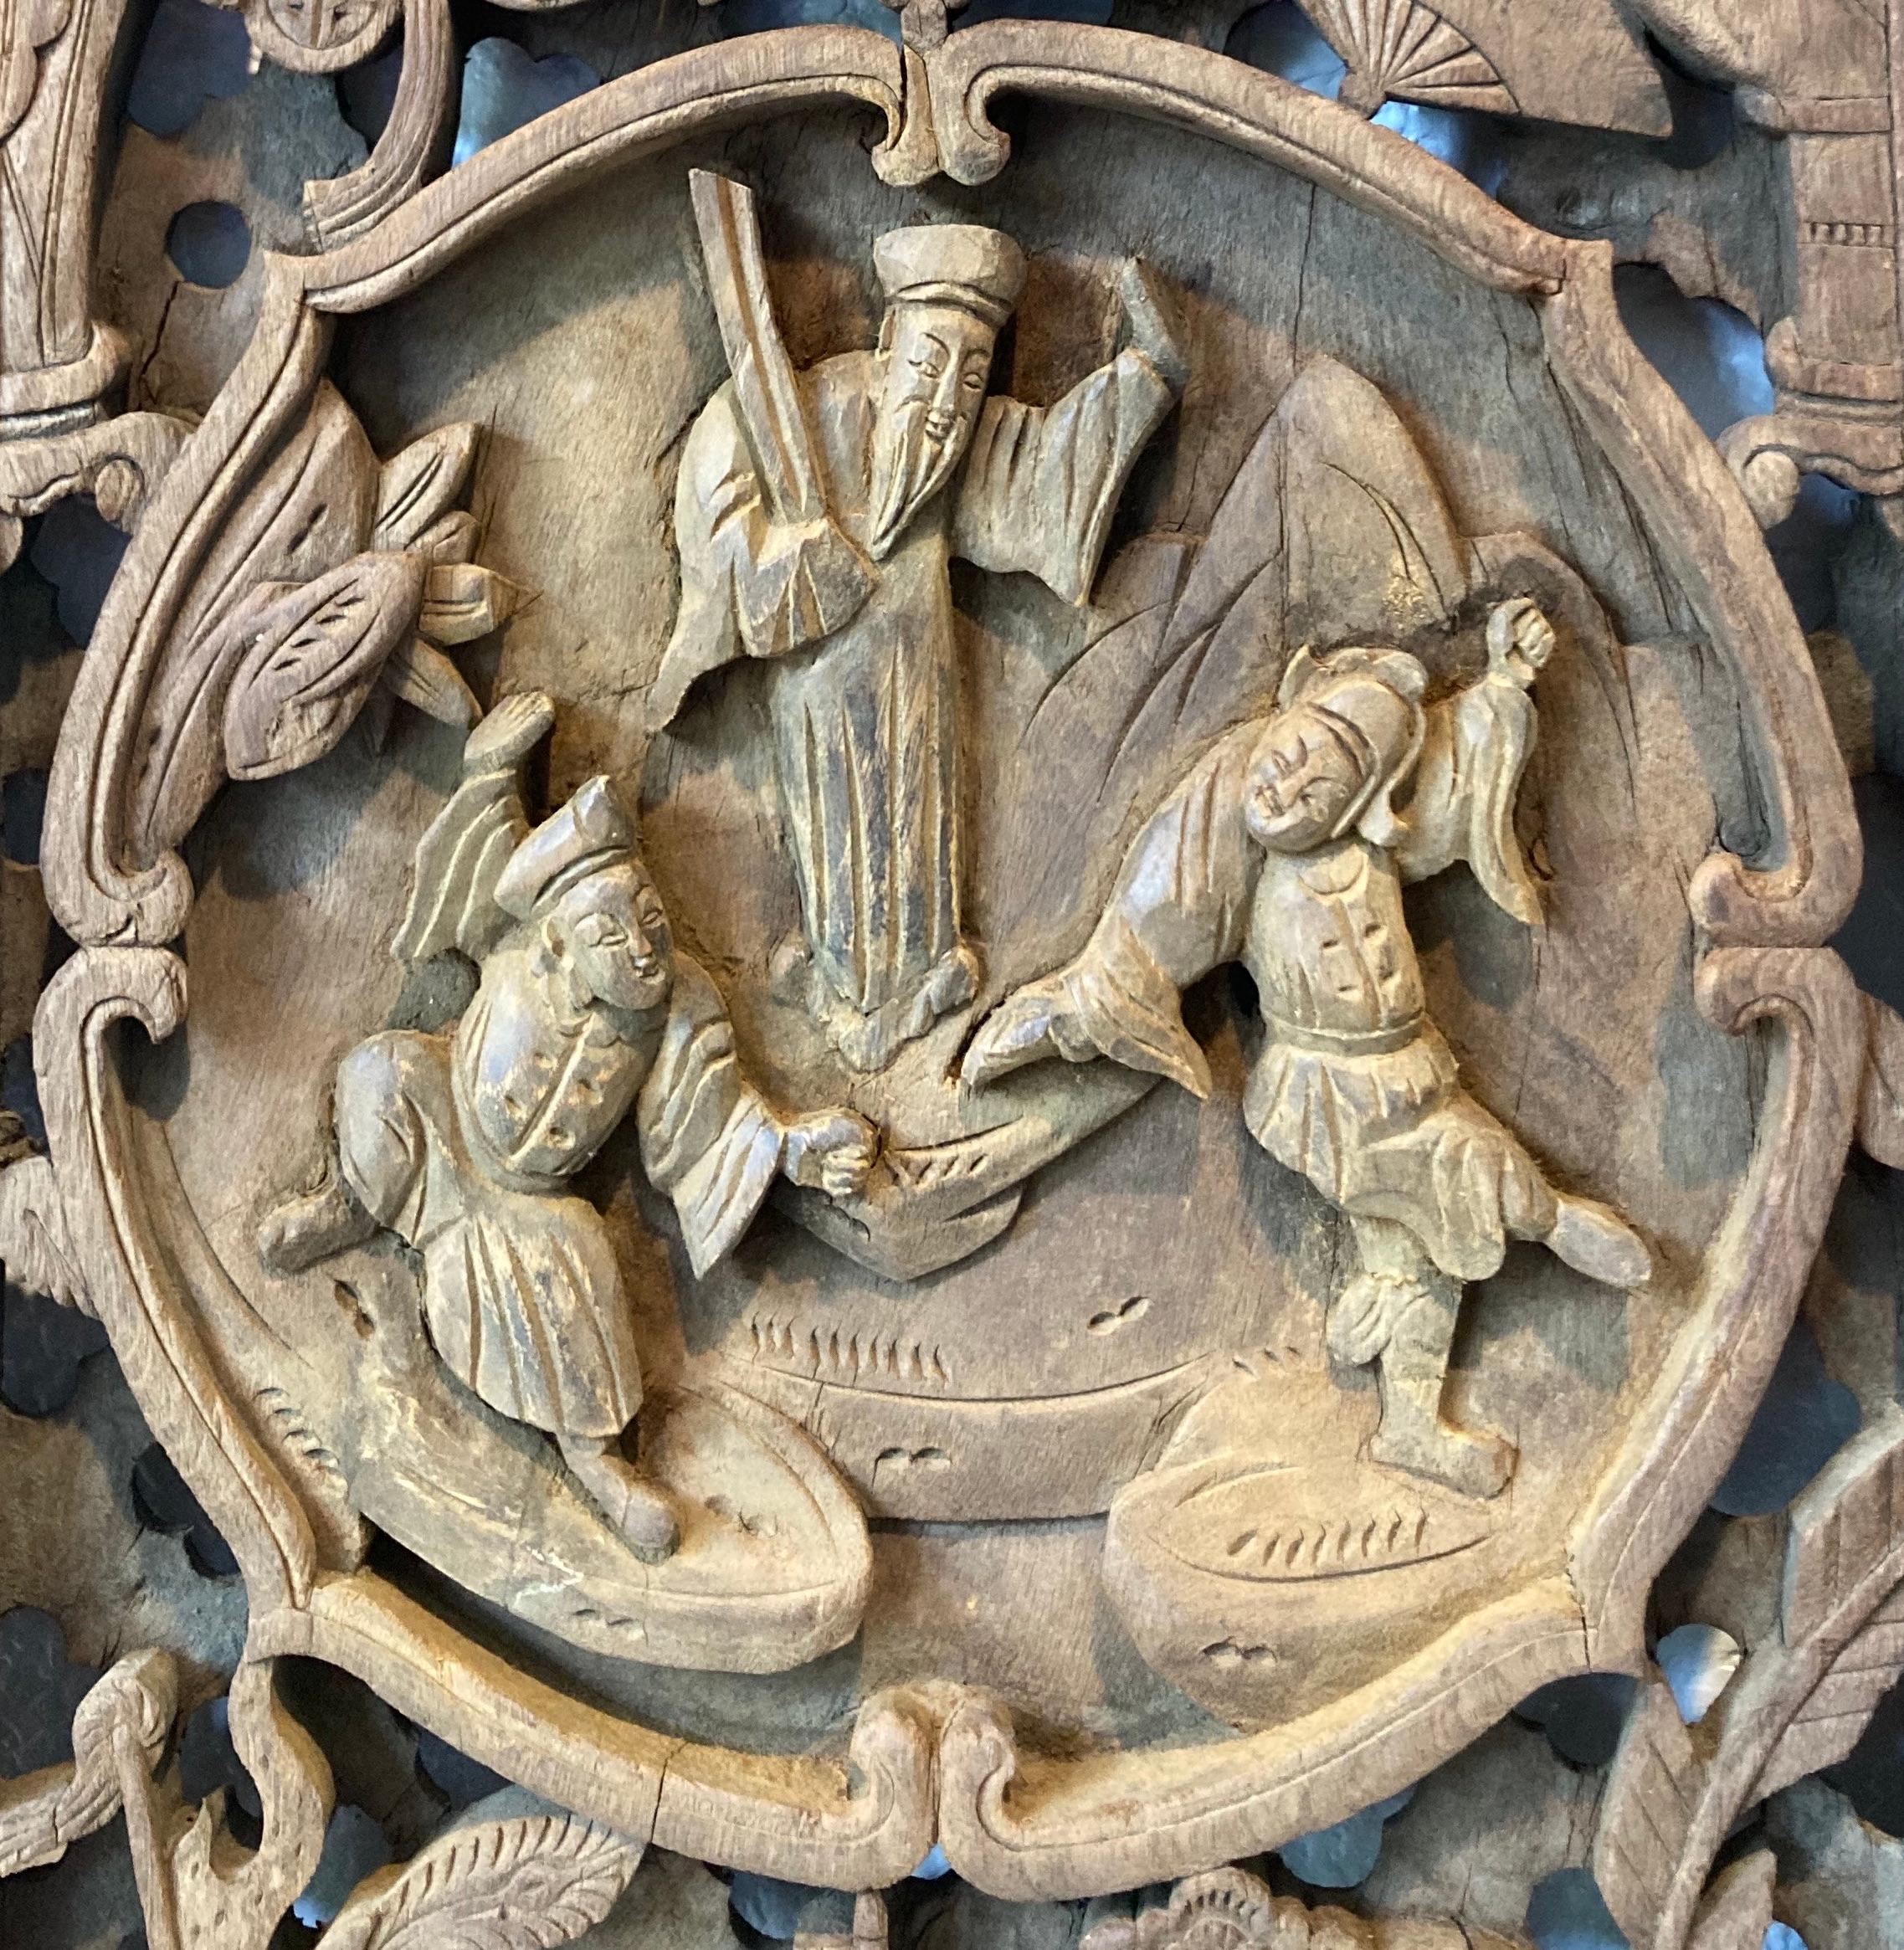 Unframed panel with openwork carving. Carved from one piece of solid wood. Circular center carving with personage, dragon and floral motifs.